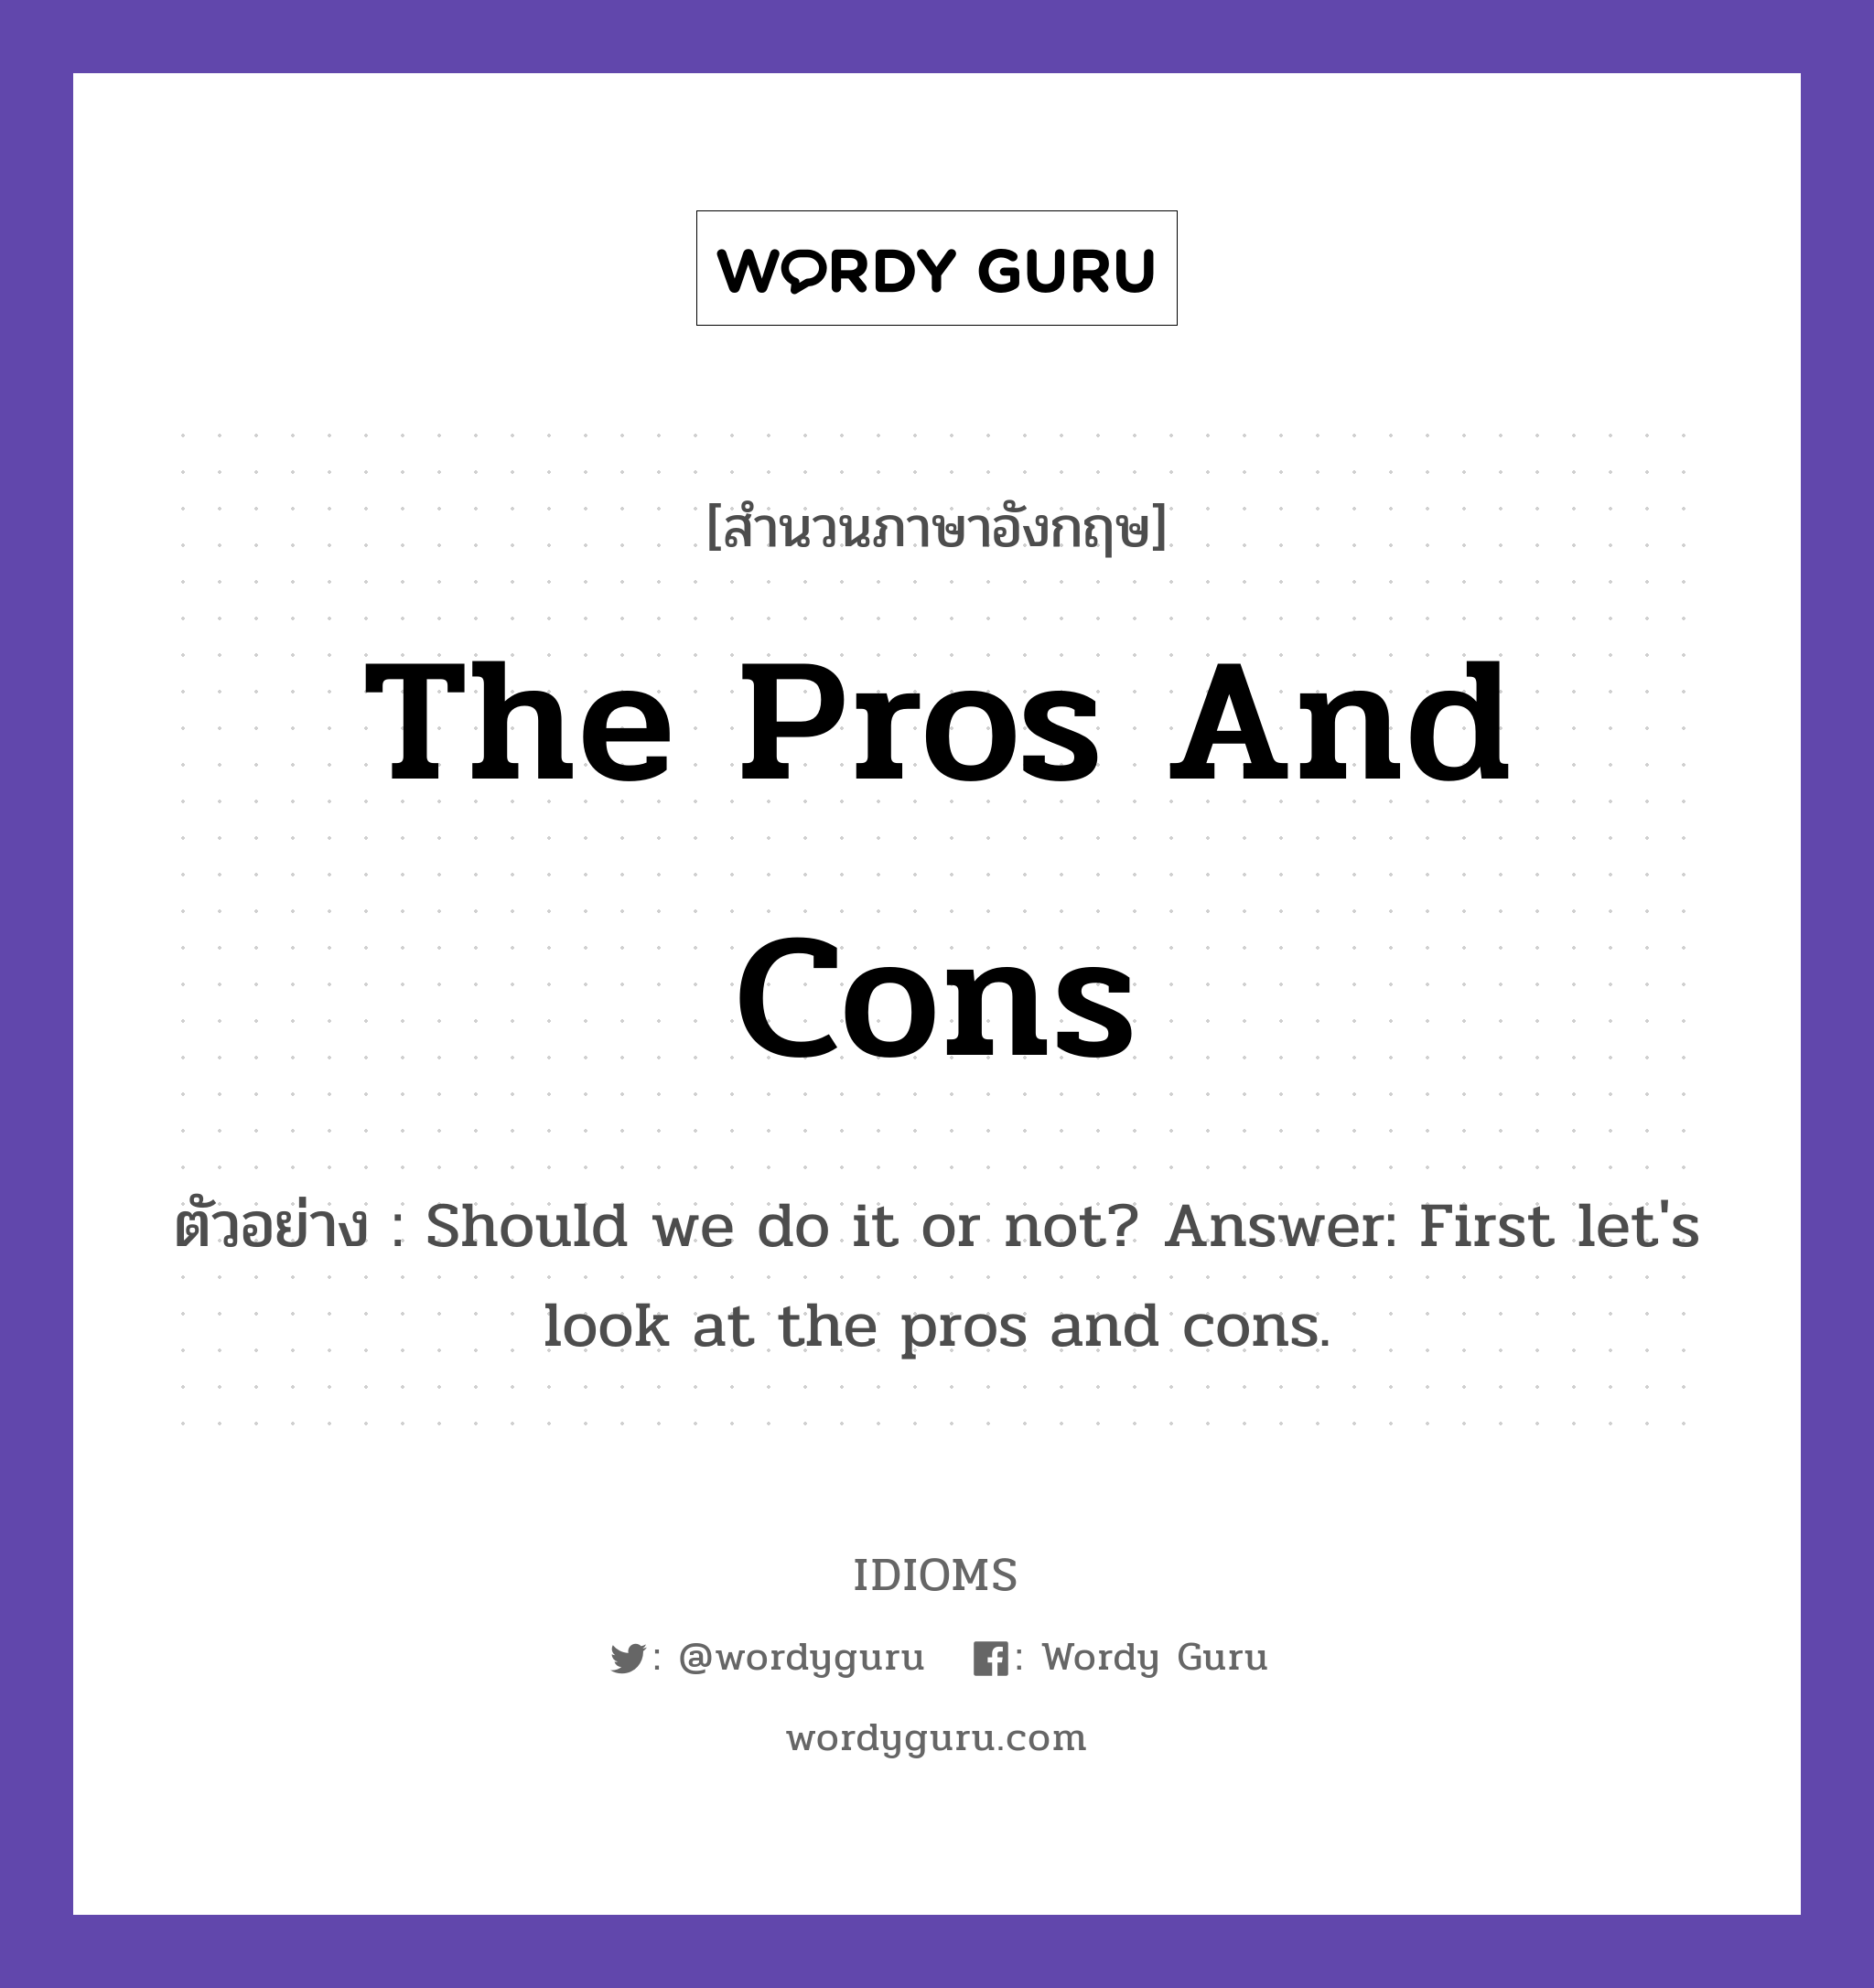 The Pros And Cons แปลว่า?, สำนวนภาษาอังกฤษ The Pros And Cons ตัวอย่าง Should we do it or not? Answer: First let's look at the pros and cons.